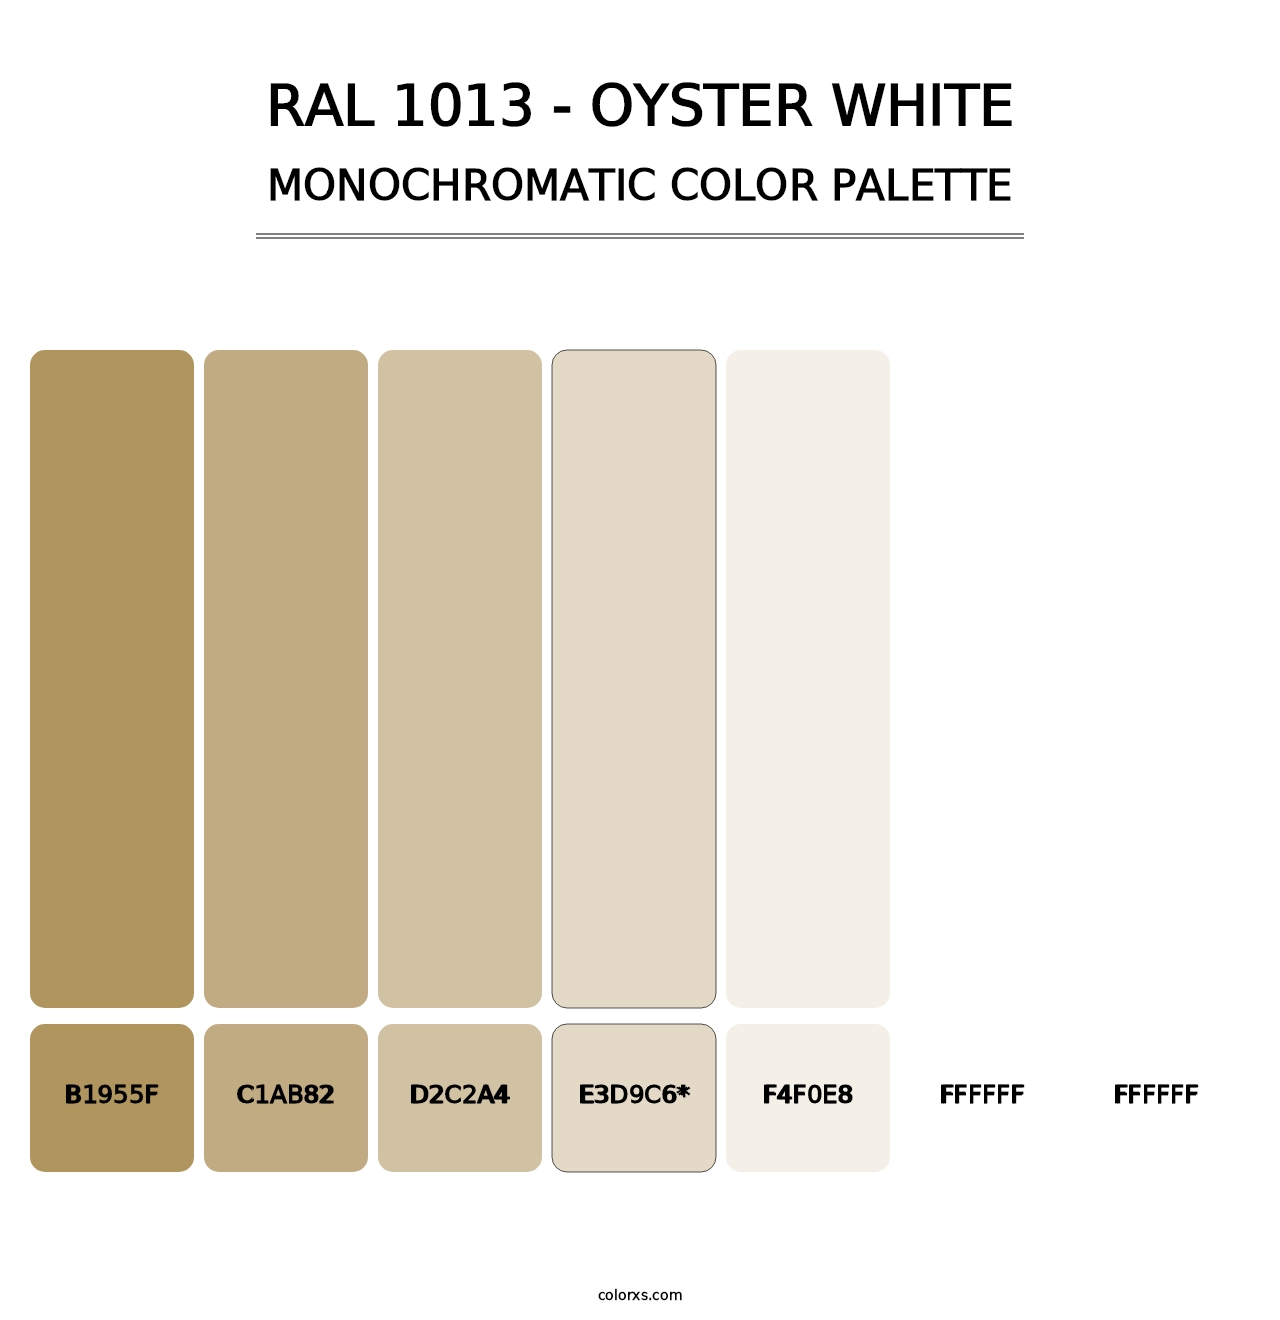 RAL 1013 - Oyster White - Monochromatic Color Palette